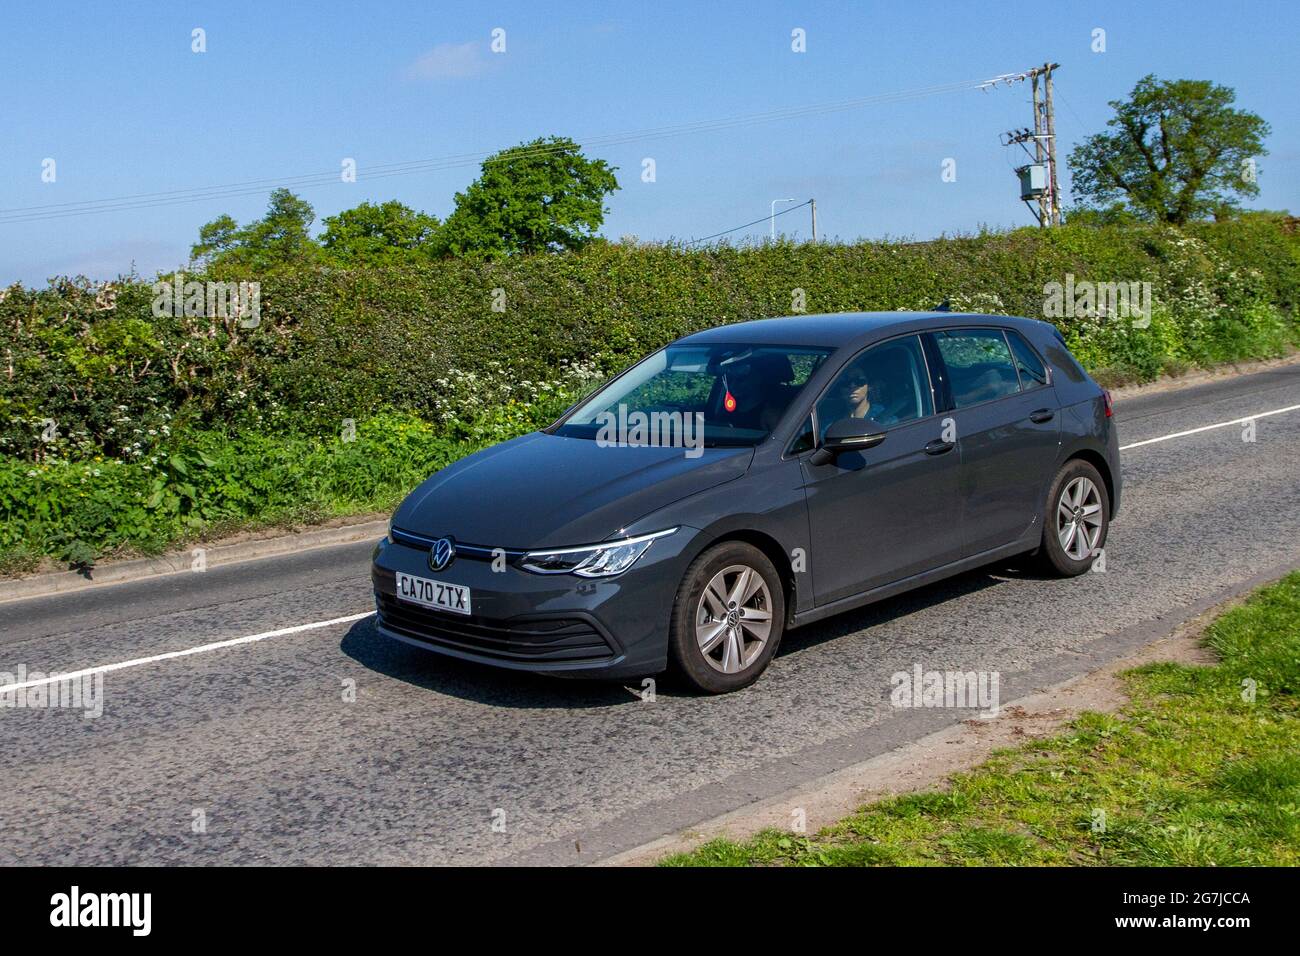 2021 grey VW Volkswagen Golf Life 4dr 6-speed manual, 999cc petrol en-route to Capesthorne Hall classic May car show, Cheshire, UK Stock Photo